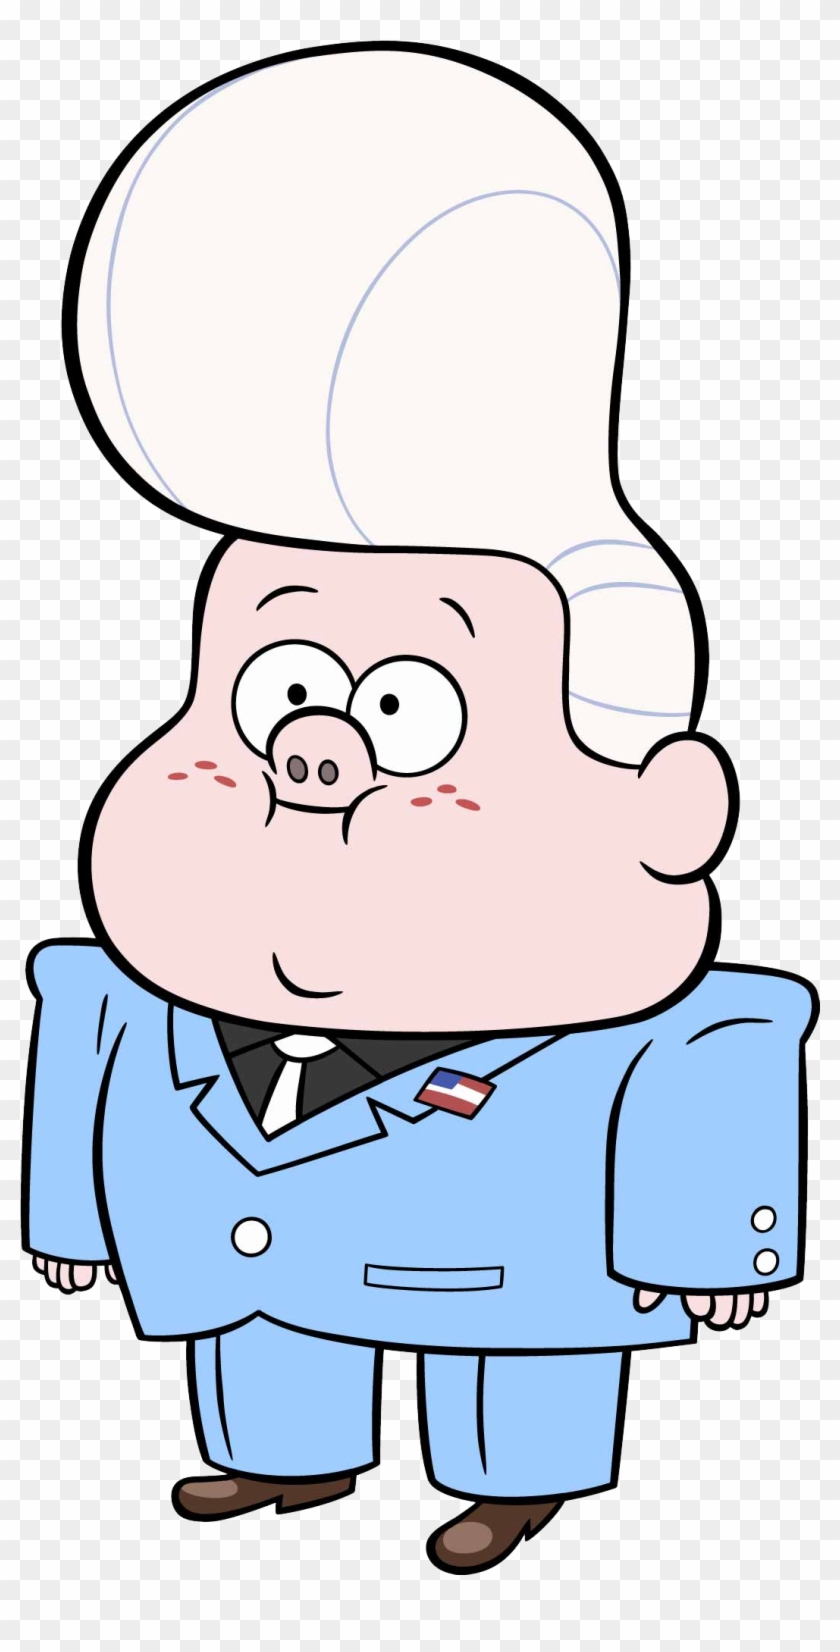 He Has A Large White Pompadour, And A Friend Suggested - Gideon De Gravity Falls Clipart #2231286